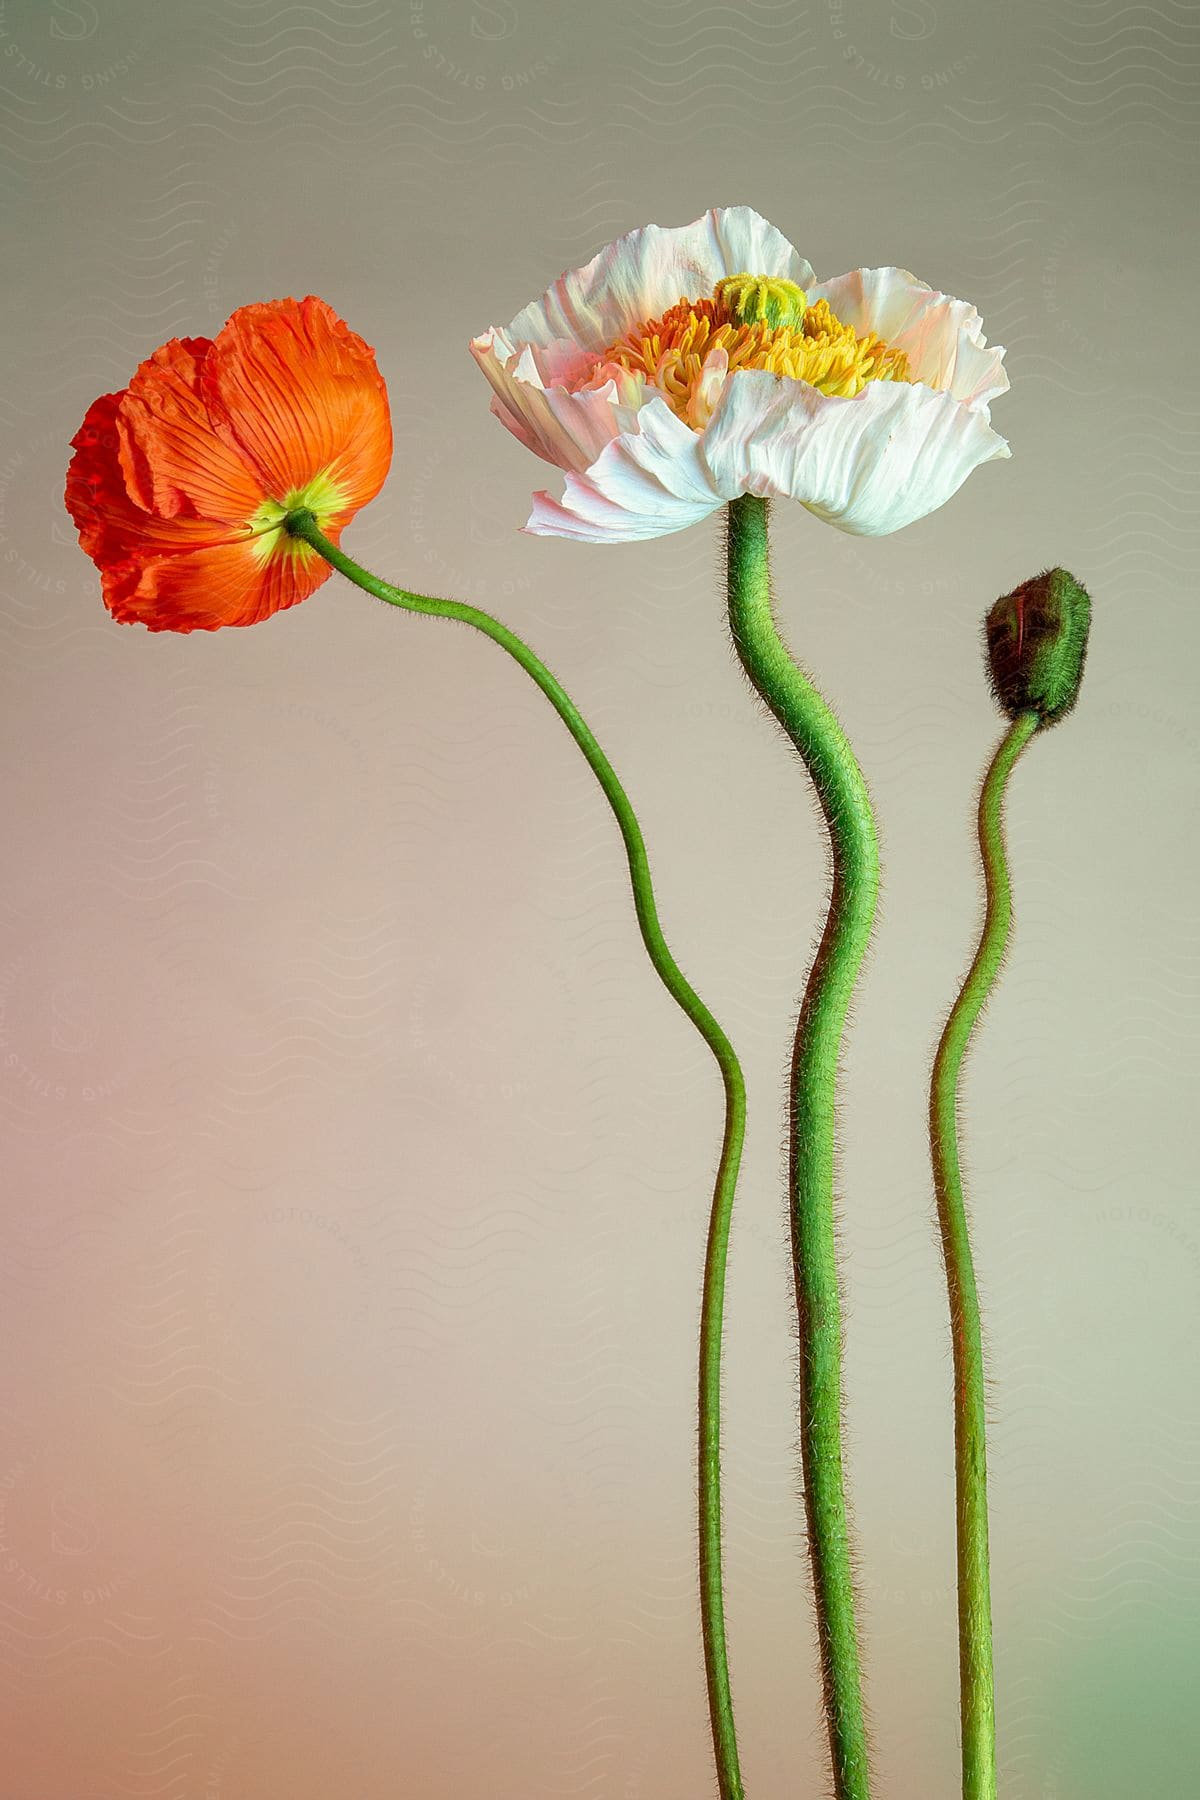 Greenish stem with white and orange flower in a blurry background